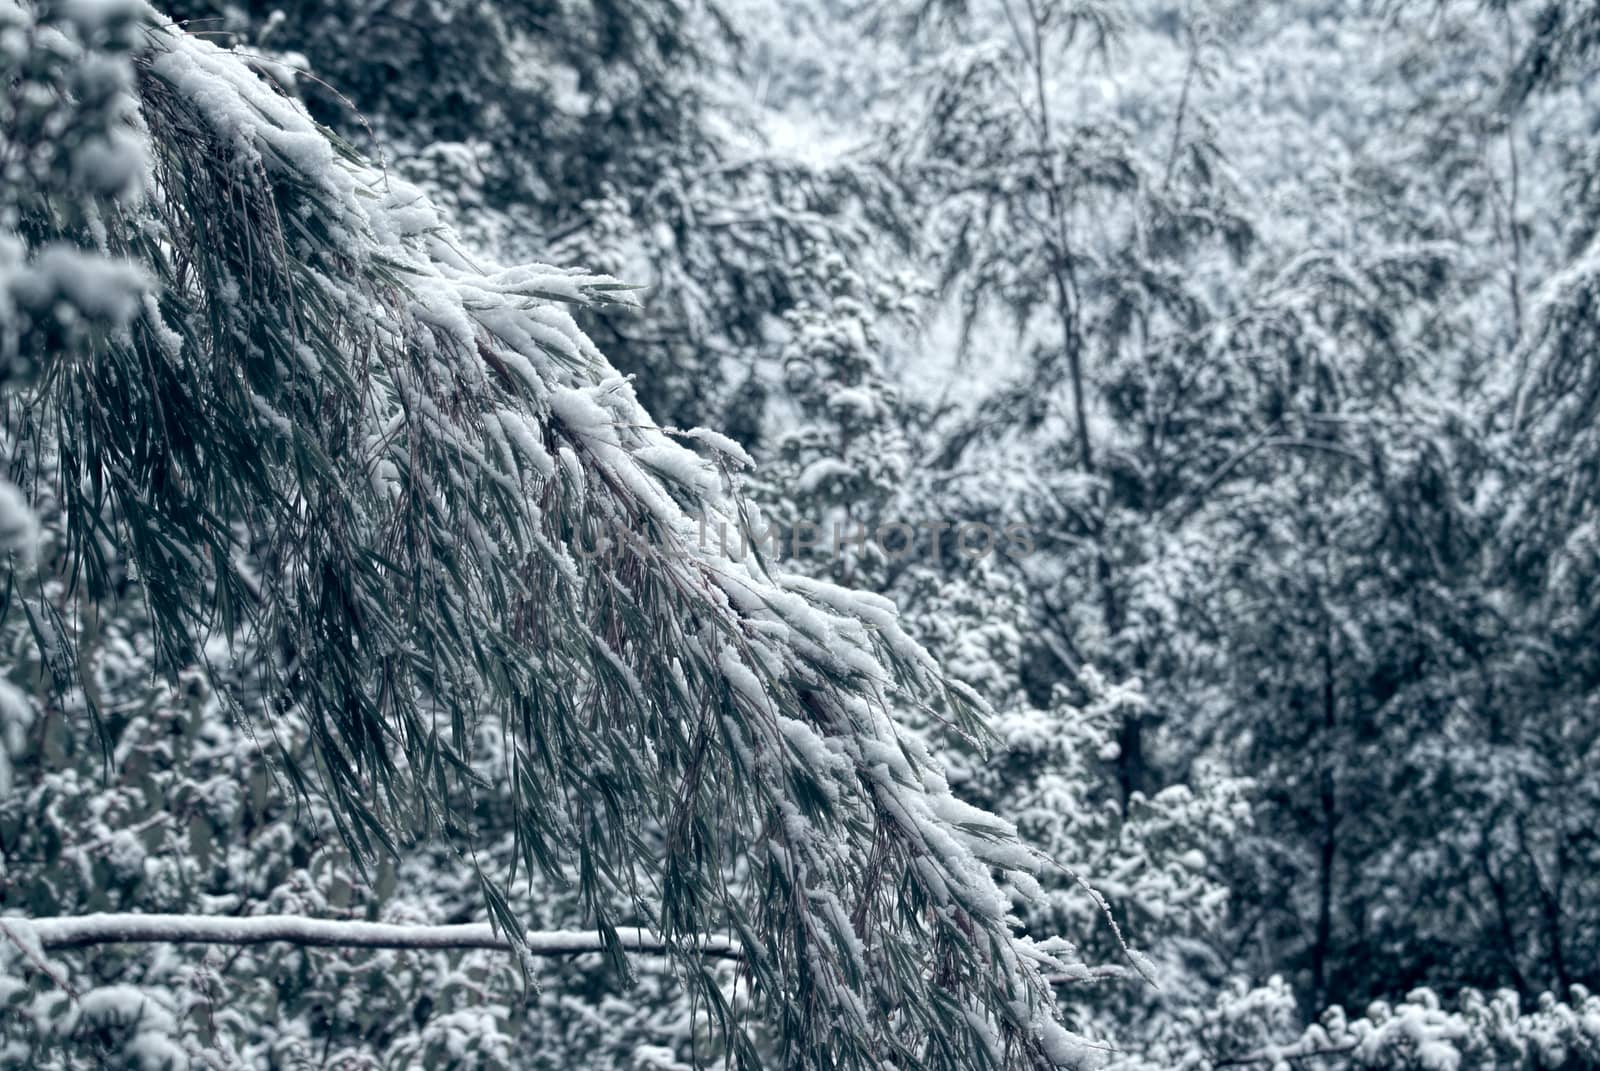 Close-up view of a long snow-covered branch in the forest